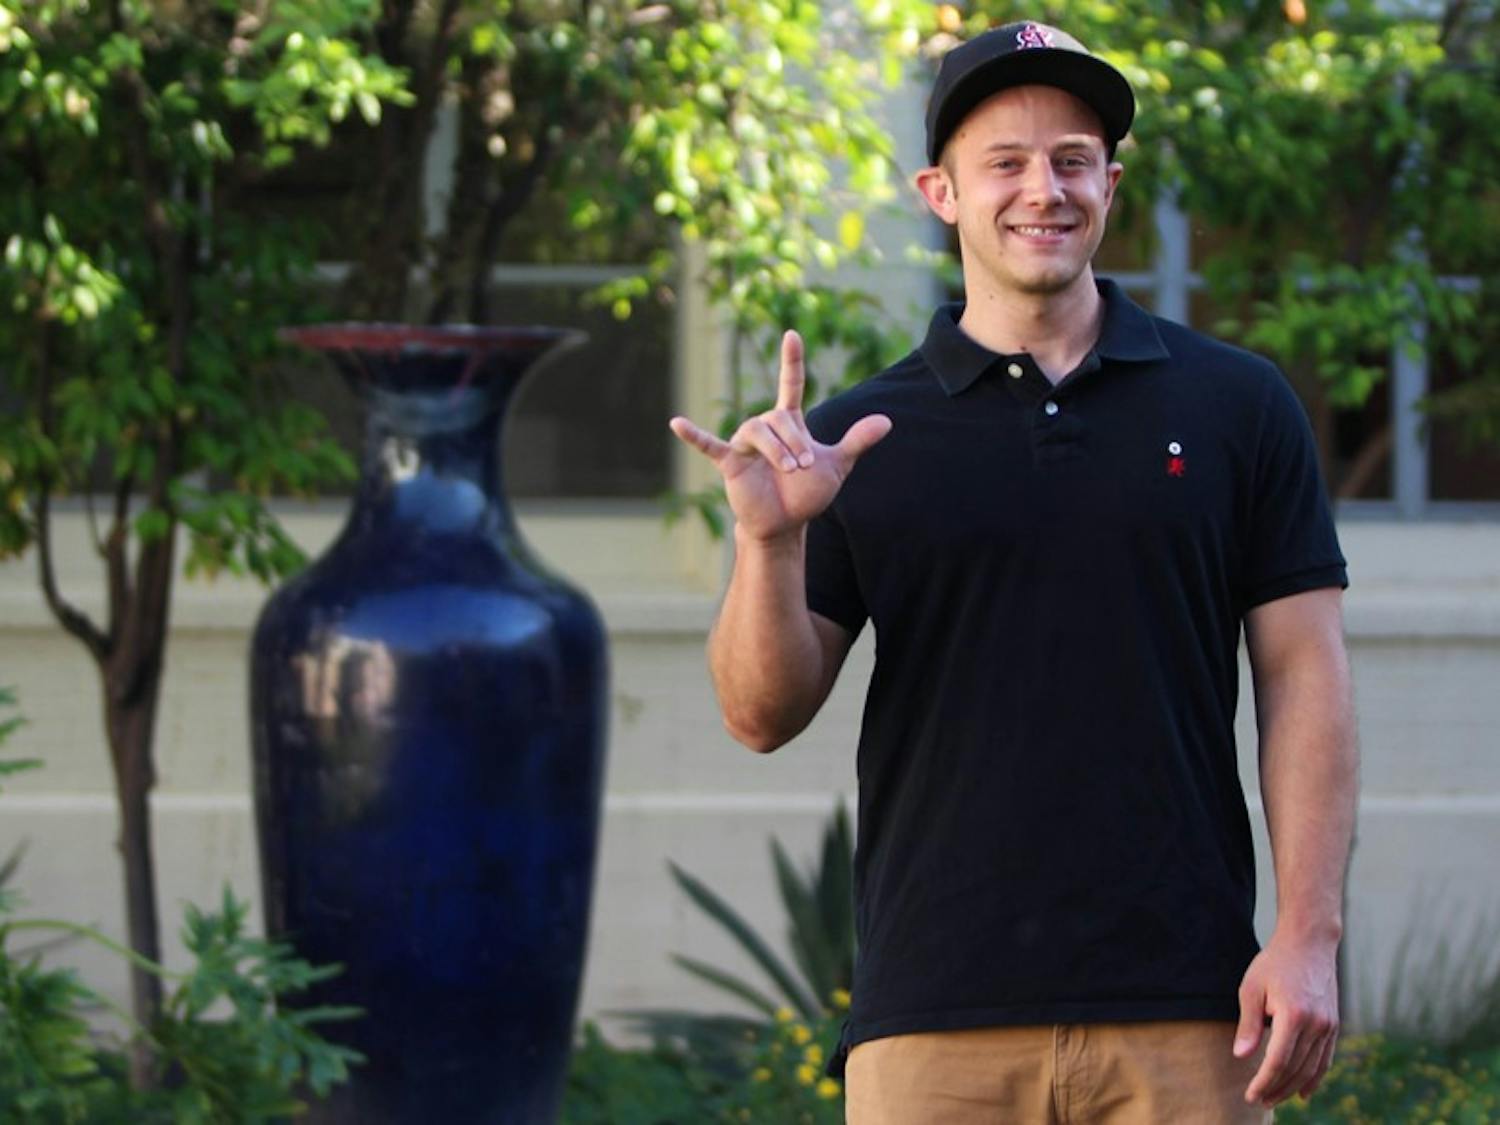 Ted Horton-Billiard poses with his favorite sign, the universal sign of love in ASU's Secret Garden. Billiard, who is currently rushing to be in a fraternity, is a deaf student who lives on the Tempe campus, where he studies history. (Photo by Dominic Valente)